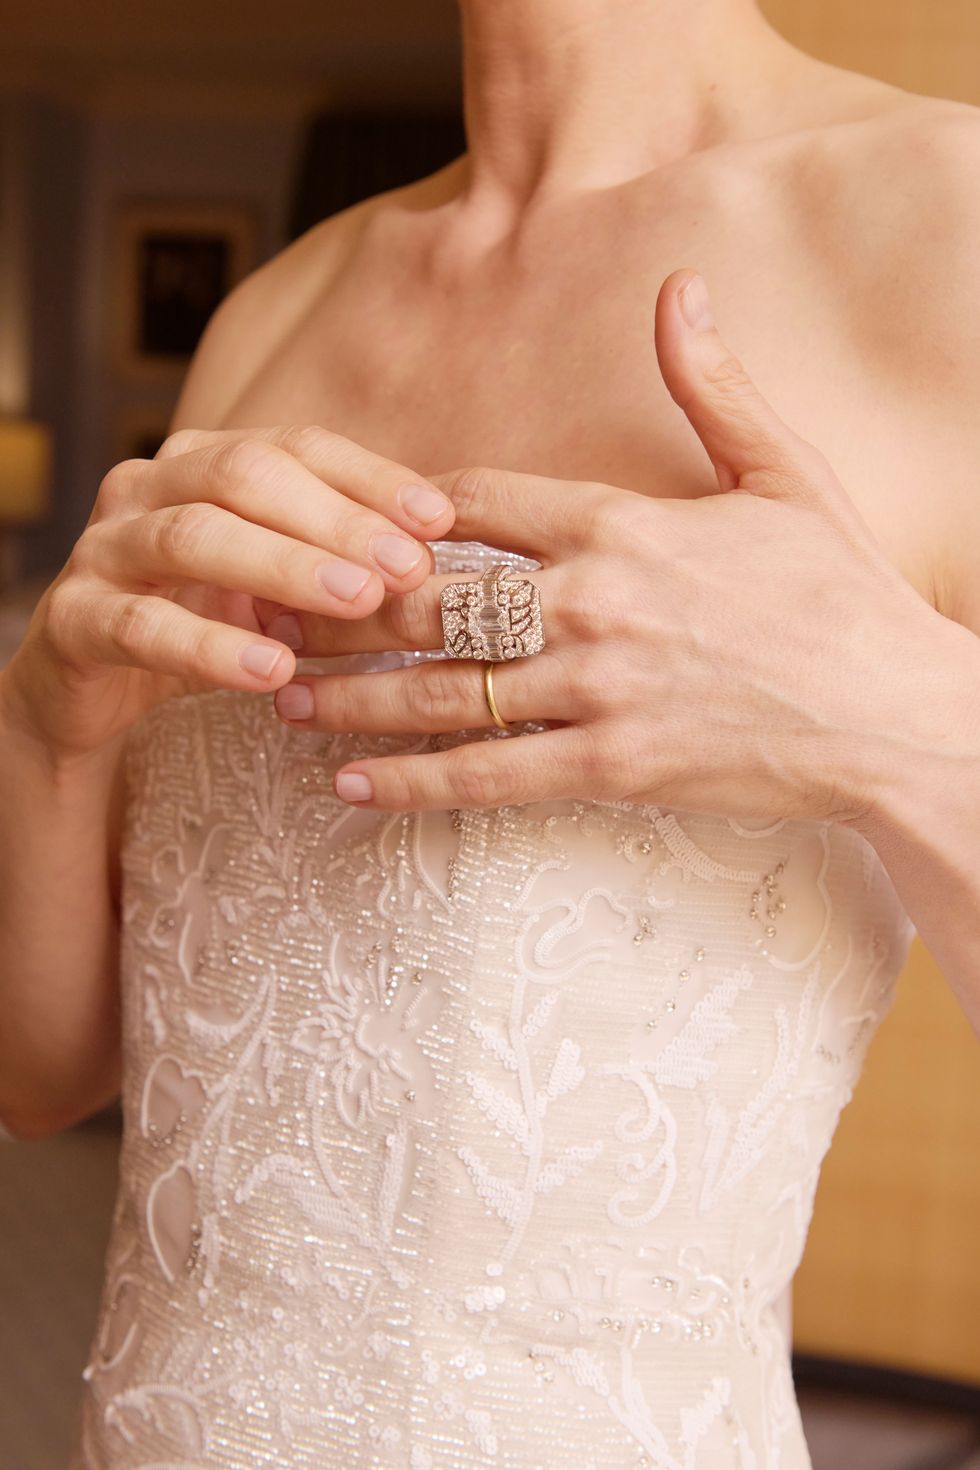 a person holding a wedding ring